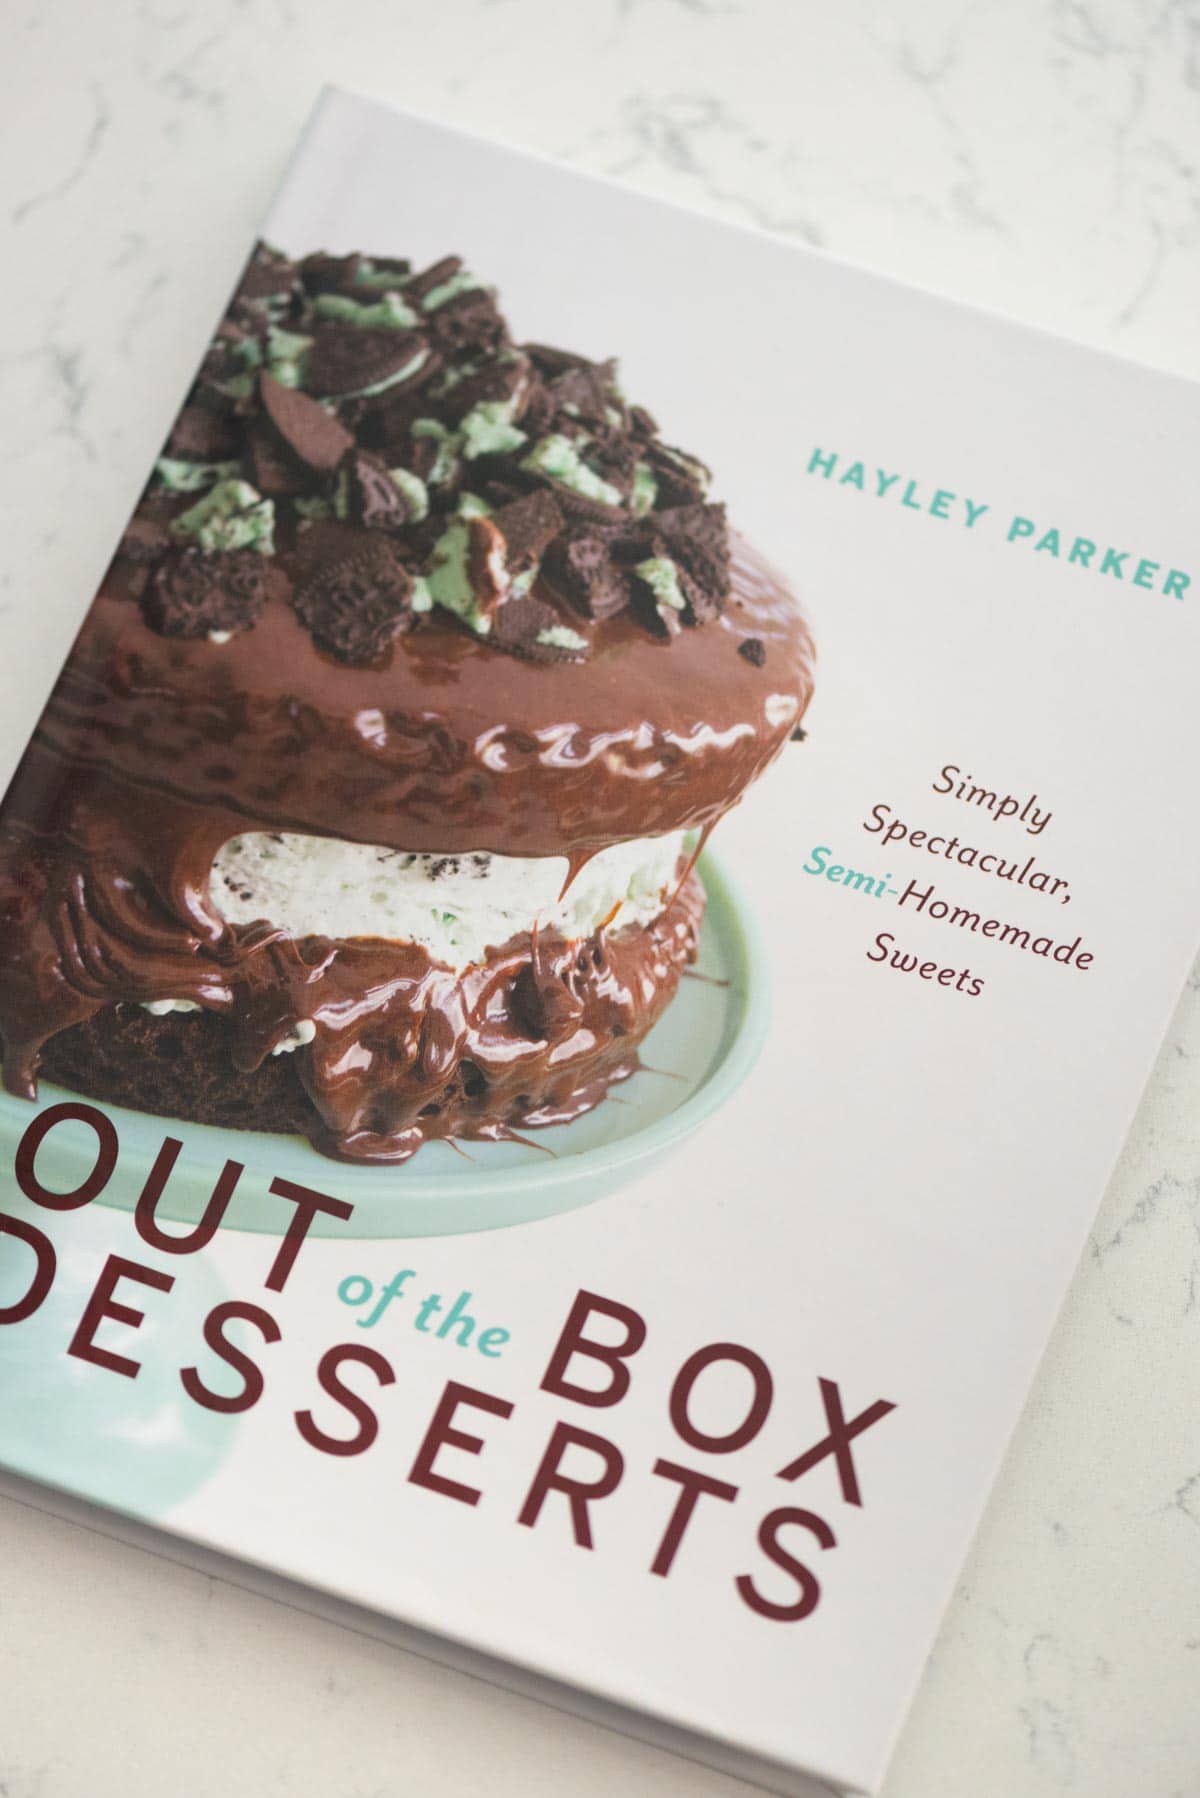 Out of the Box Desserts by Hayley Parker